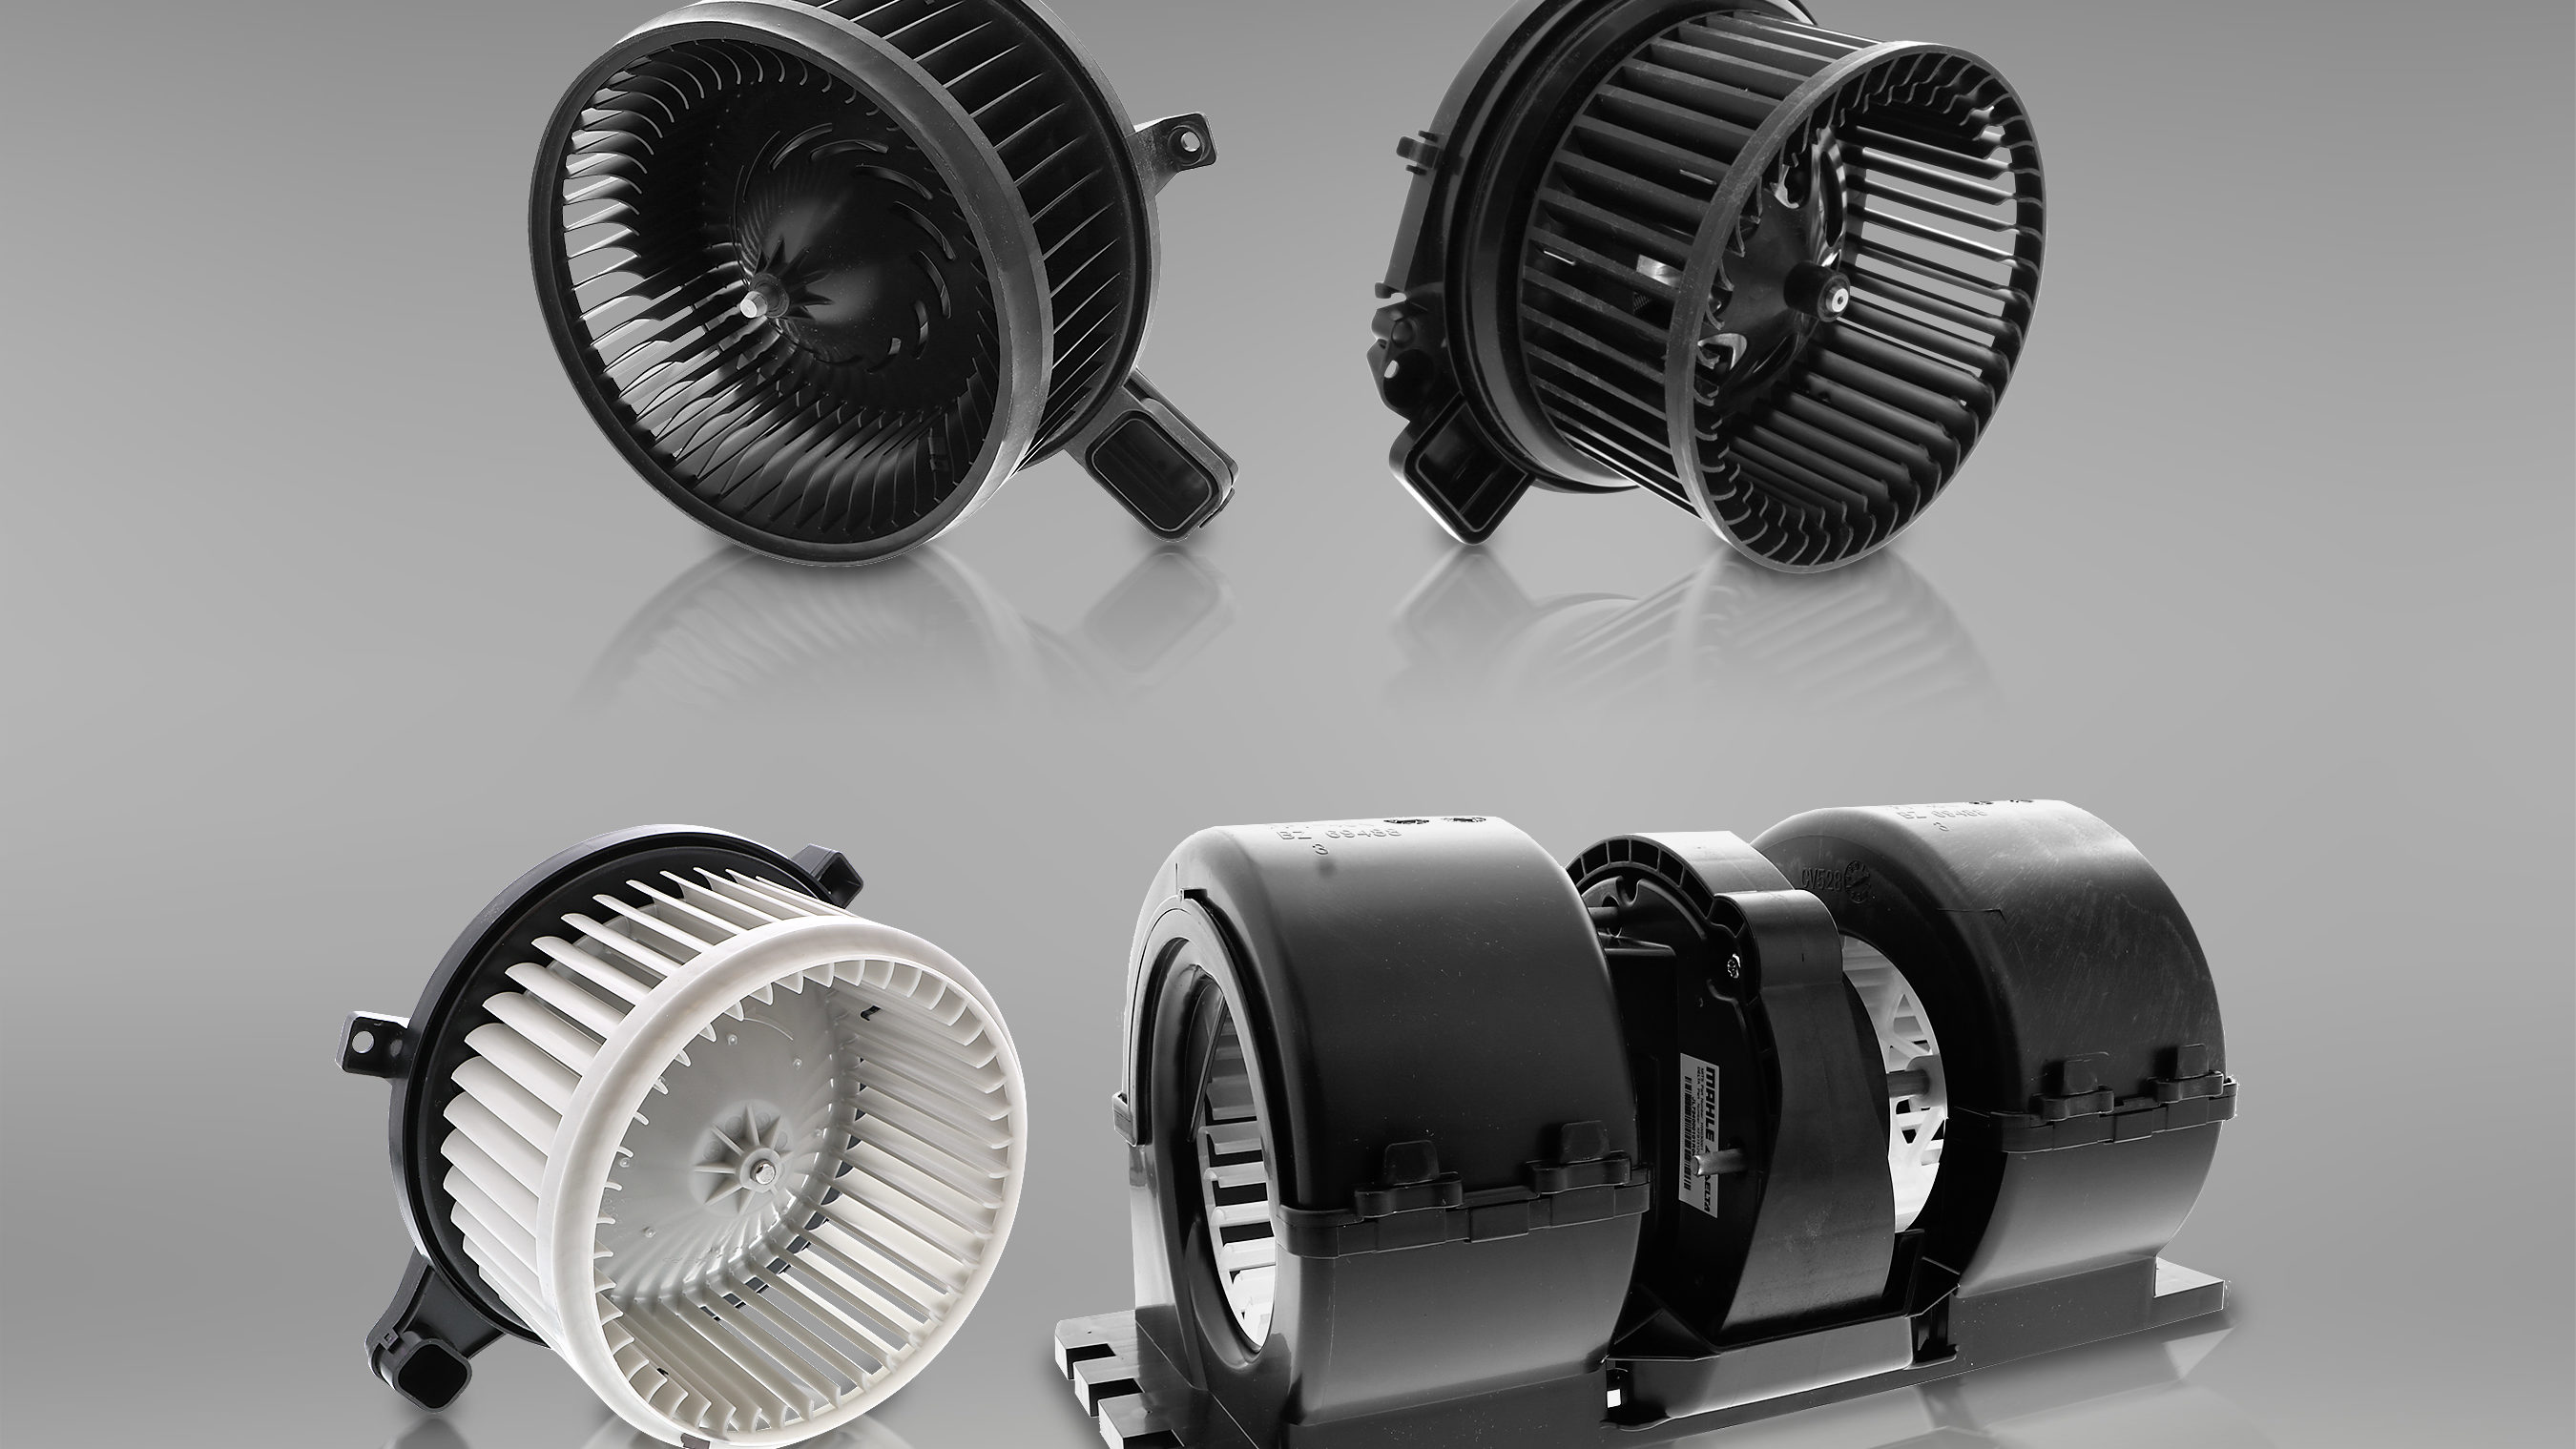 Continental, a leading aftermarket supplier of OE-engineered replacement parts, has added 12 new and exclusive late model blower motor SKUs to its world class line of HVAC motors. 